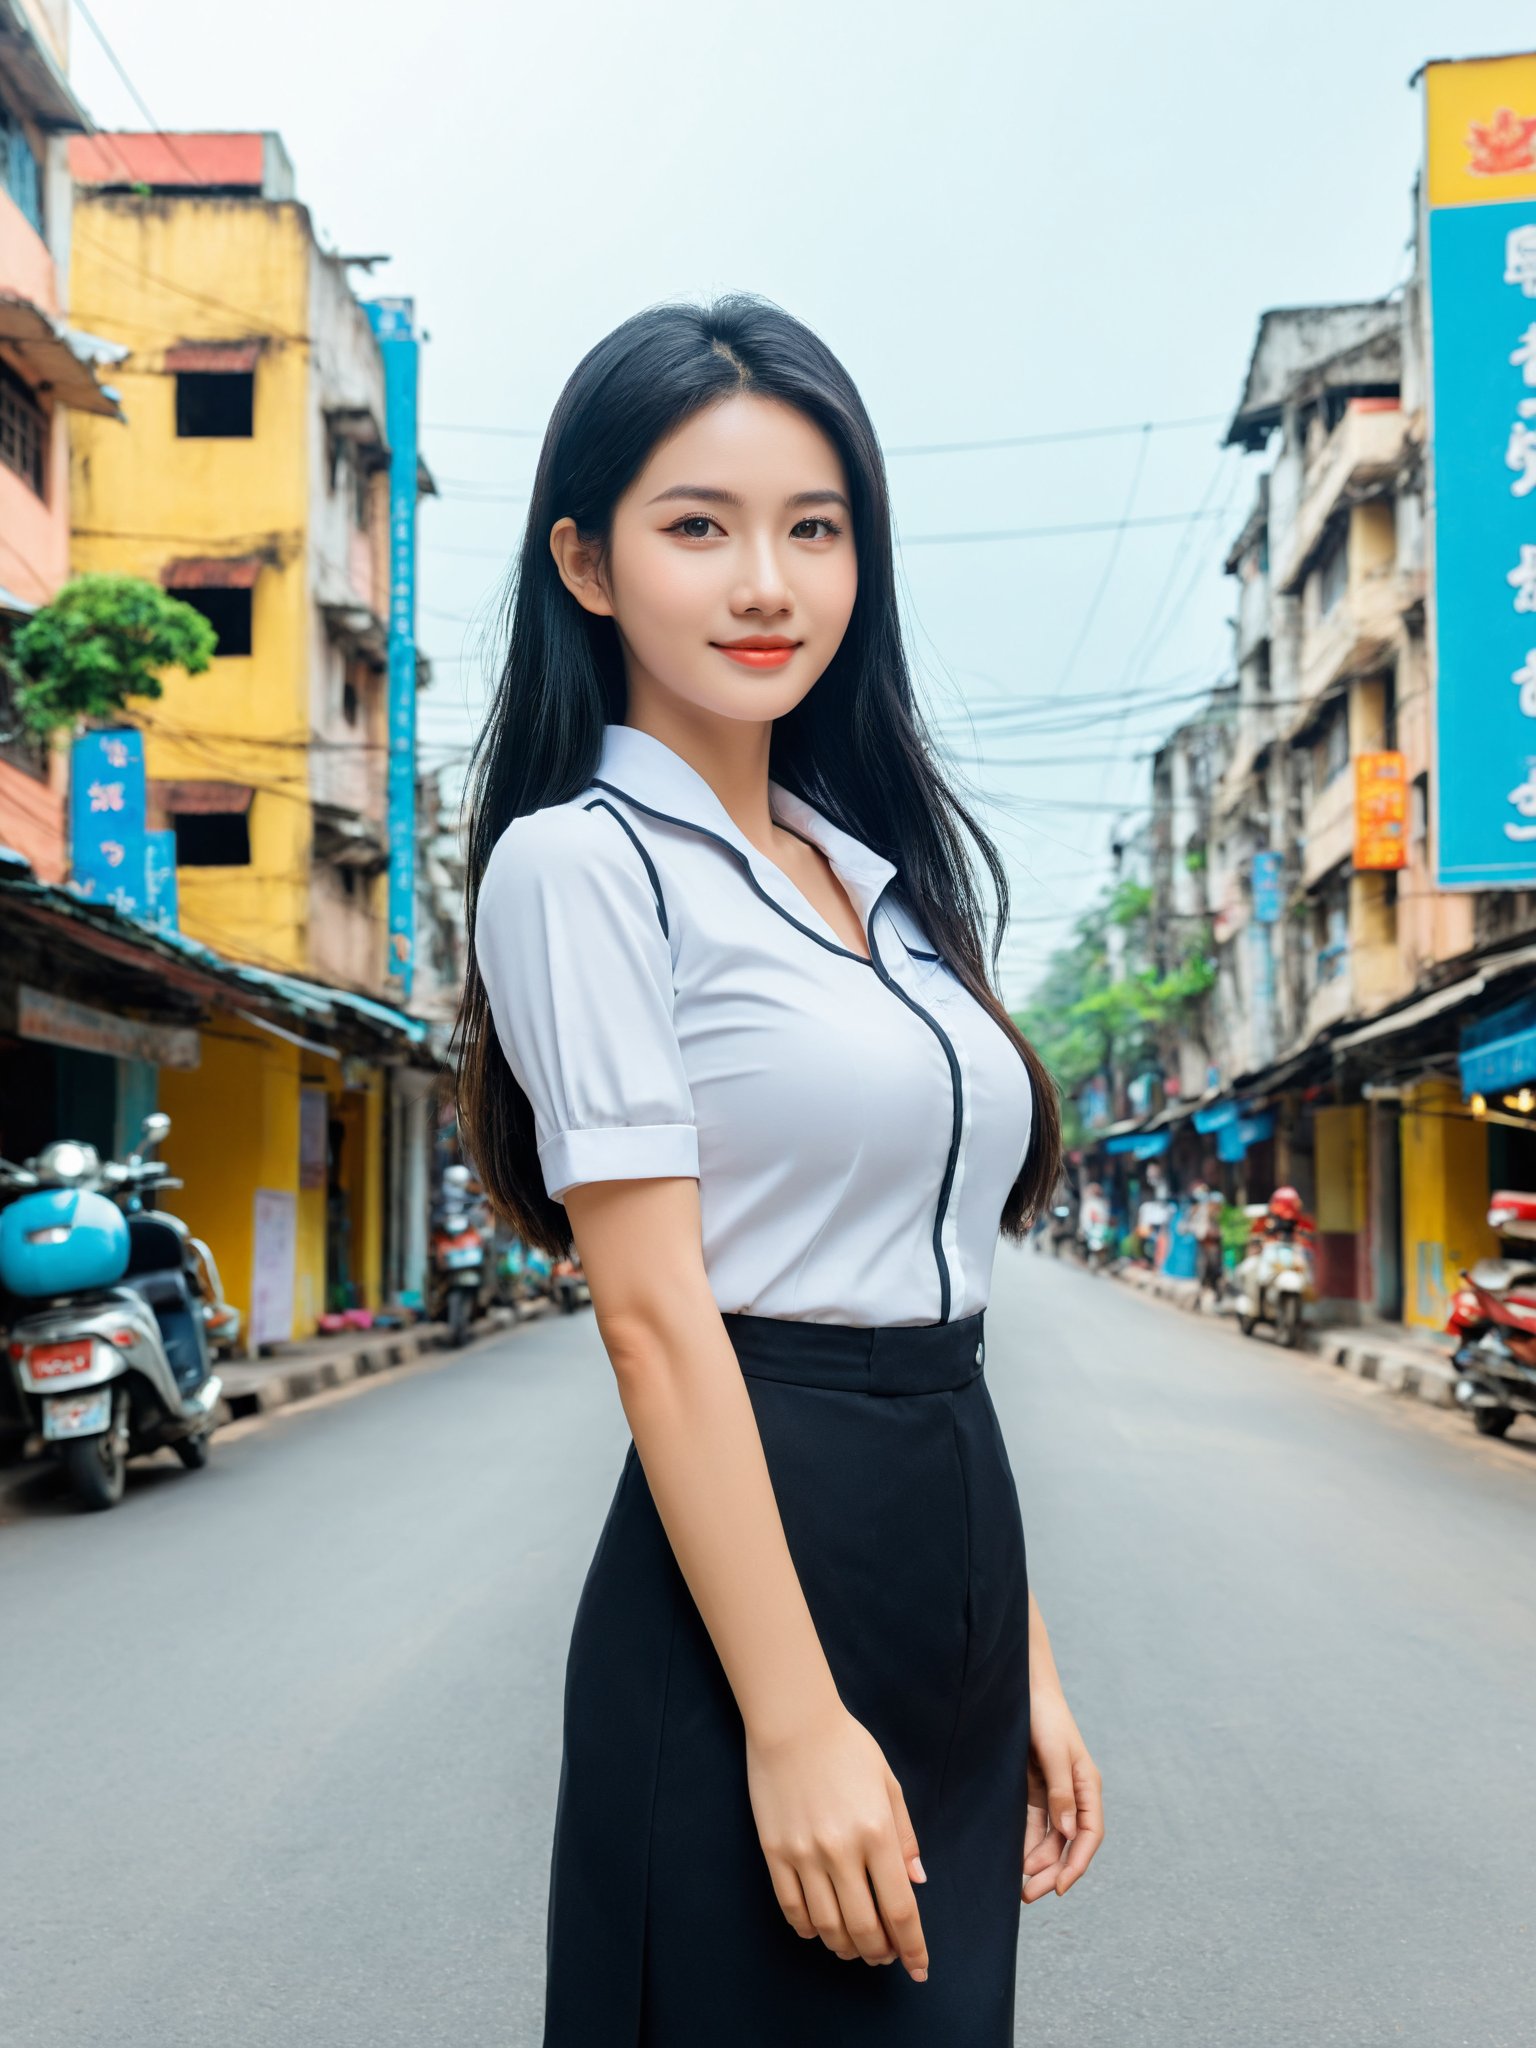 masterpiece, best quality, realistic, photo, real, incredibly_absurdres, Ultra HD, Affectionately looking at you, 8K, UHD, in the vietnamese city street, full body, arms behind head, arms behind back, bust photo,masterpiece, best quality, realistic, photo, real, incredibly_absurdres, Ultra HD, Affectionately looking at you, 8K, UHD, in the vietnamese city street, full body, arms behind head, arms behind back, bust photo,The 20-year-old vietnamese girl, She has black hair, nurse shirt outfit, The lines of her face are soft and smooth. Her skin is as fair as snow, soft and delicate, and her eyes are bright and bright, deep and mysterious, making people feel endless charm and appeal. The eyebrows are slender and graceful, the nose is straight and noble, the lips are rosy and seductive, and the slightly raised angle reveals confidence and elegance. Her facial features are delicate and three-dimensional, with well-defined contours, like a fine painting or a finely carved work of art. The overall feeling is gentle, elegant, noble and full of charm, huge_filesize, bust, girl, kawaii, adorable girl, bishoujo, ojousama, idol, wavy hair, long hair, black hair, beautiful detailed eyes, looking at viewer, seductive smile, black eyes, large breasts, arms behind back